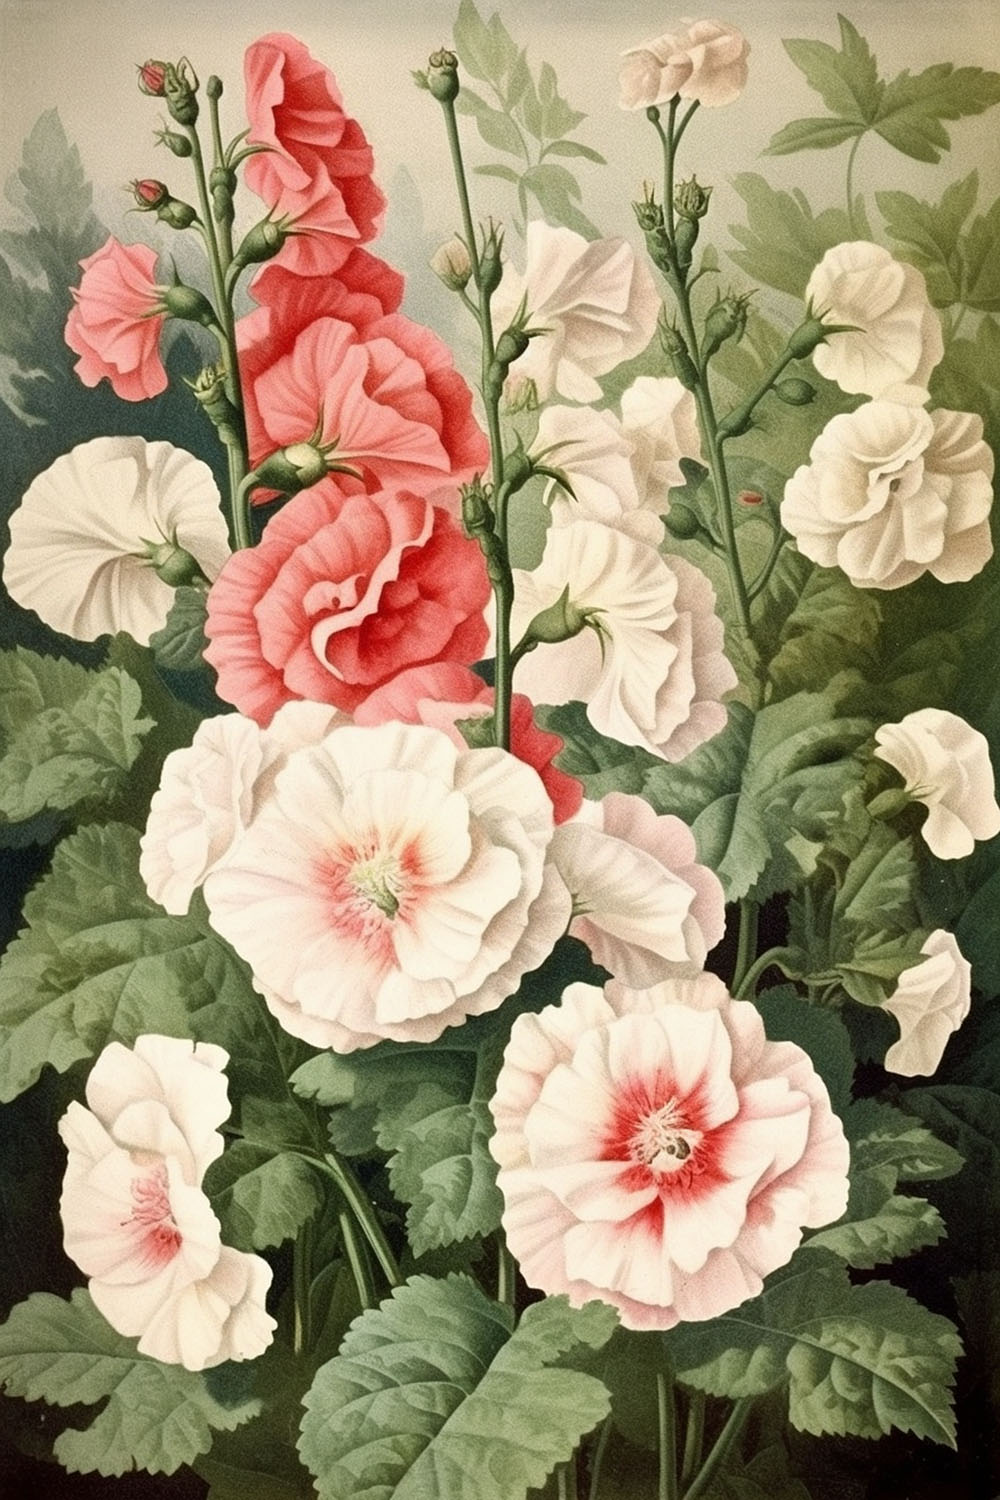 Pink and white Flowers